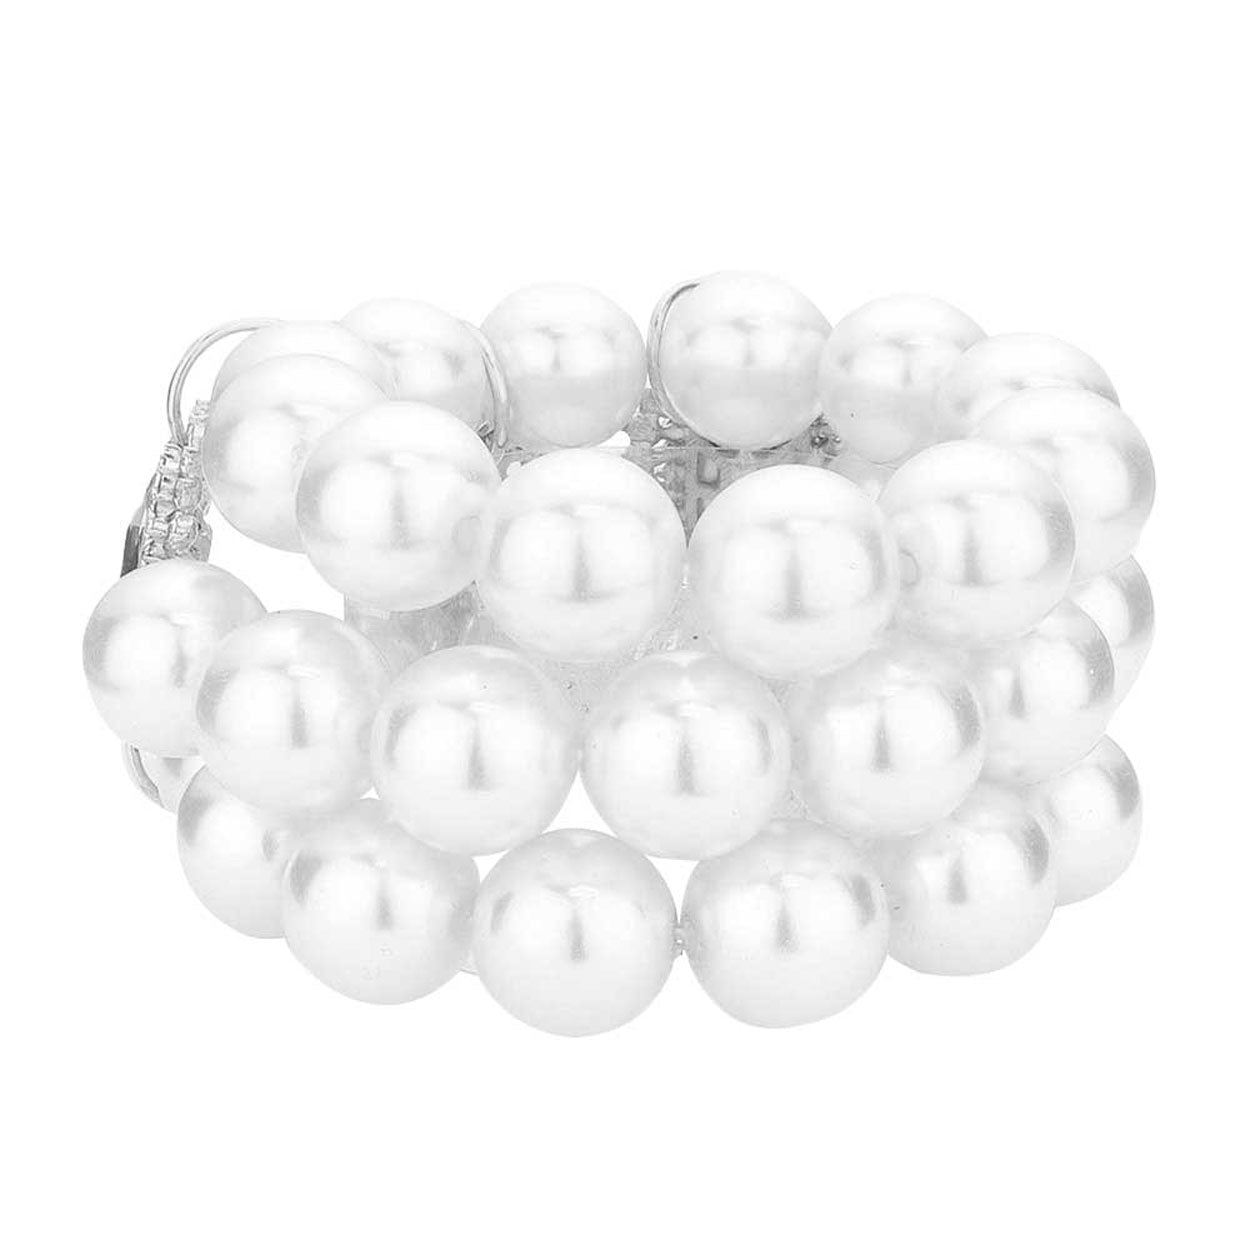 Rhodium White Glass Stone Accented Pearl Stretch Bracelet. This pearl stretch Bracelet sparkles all around with it's surrounding glass stones, stylish evening bracelet that is easy to put on, take off and comfortable to wear. It looks stylish and is just the right touch to set off your dress. Suitable for Night Out, Party, Formal, Special Occasion, Date Night, Prom.